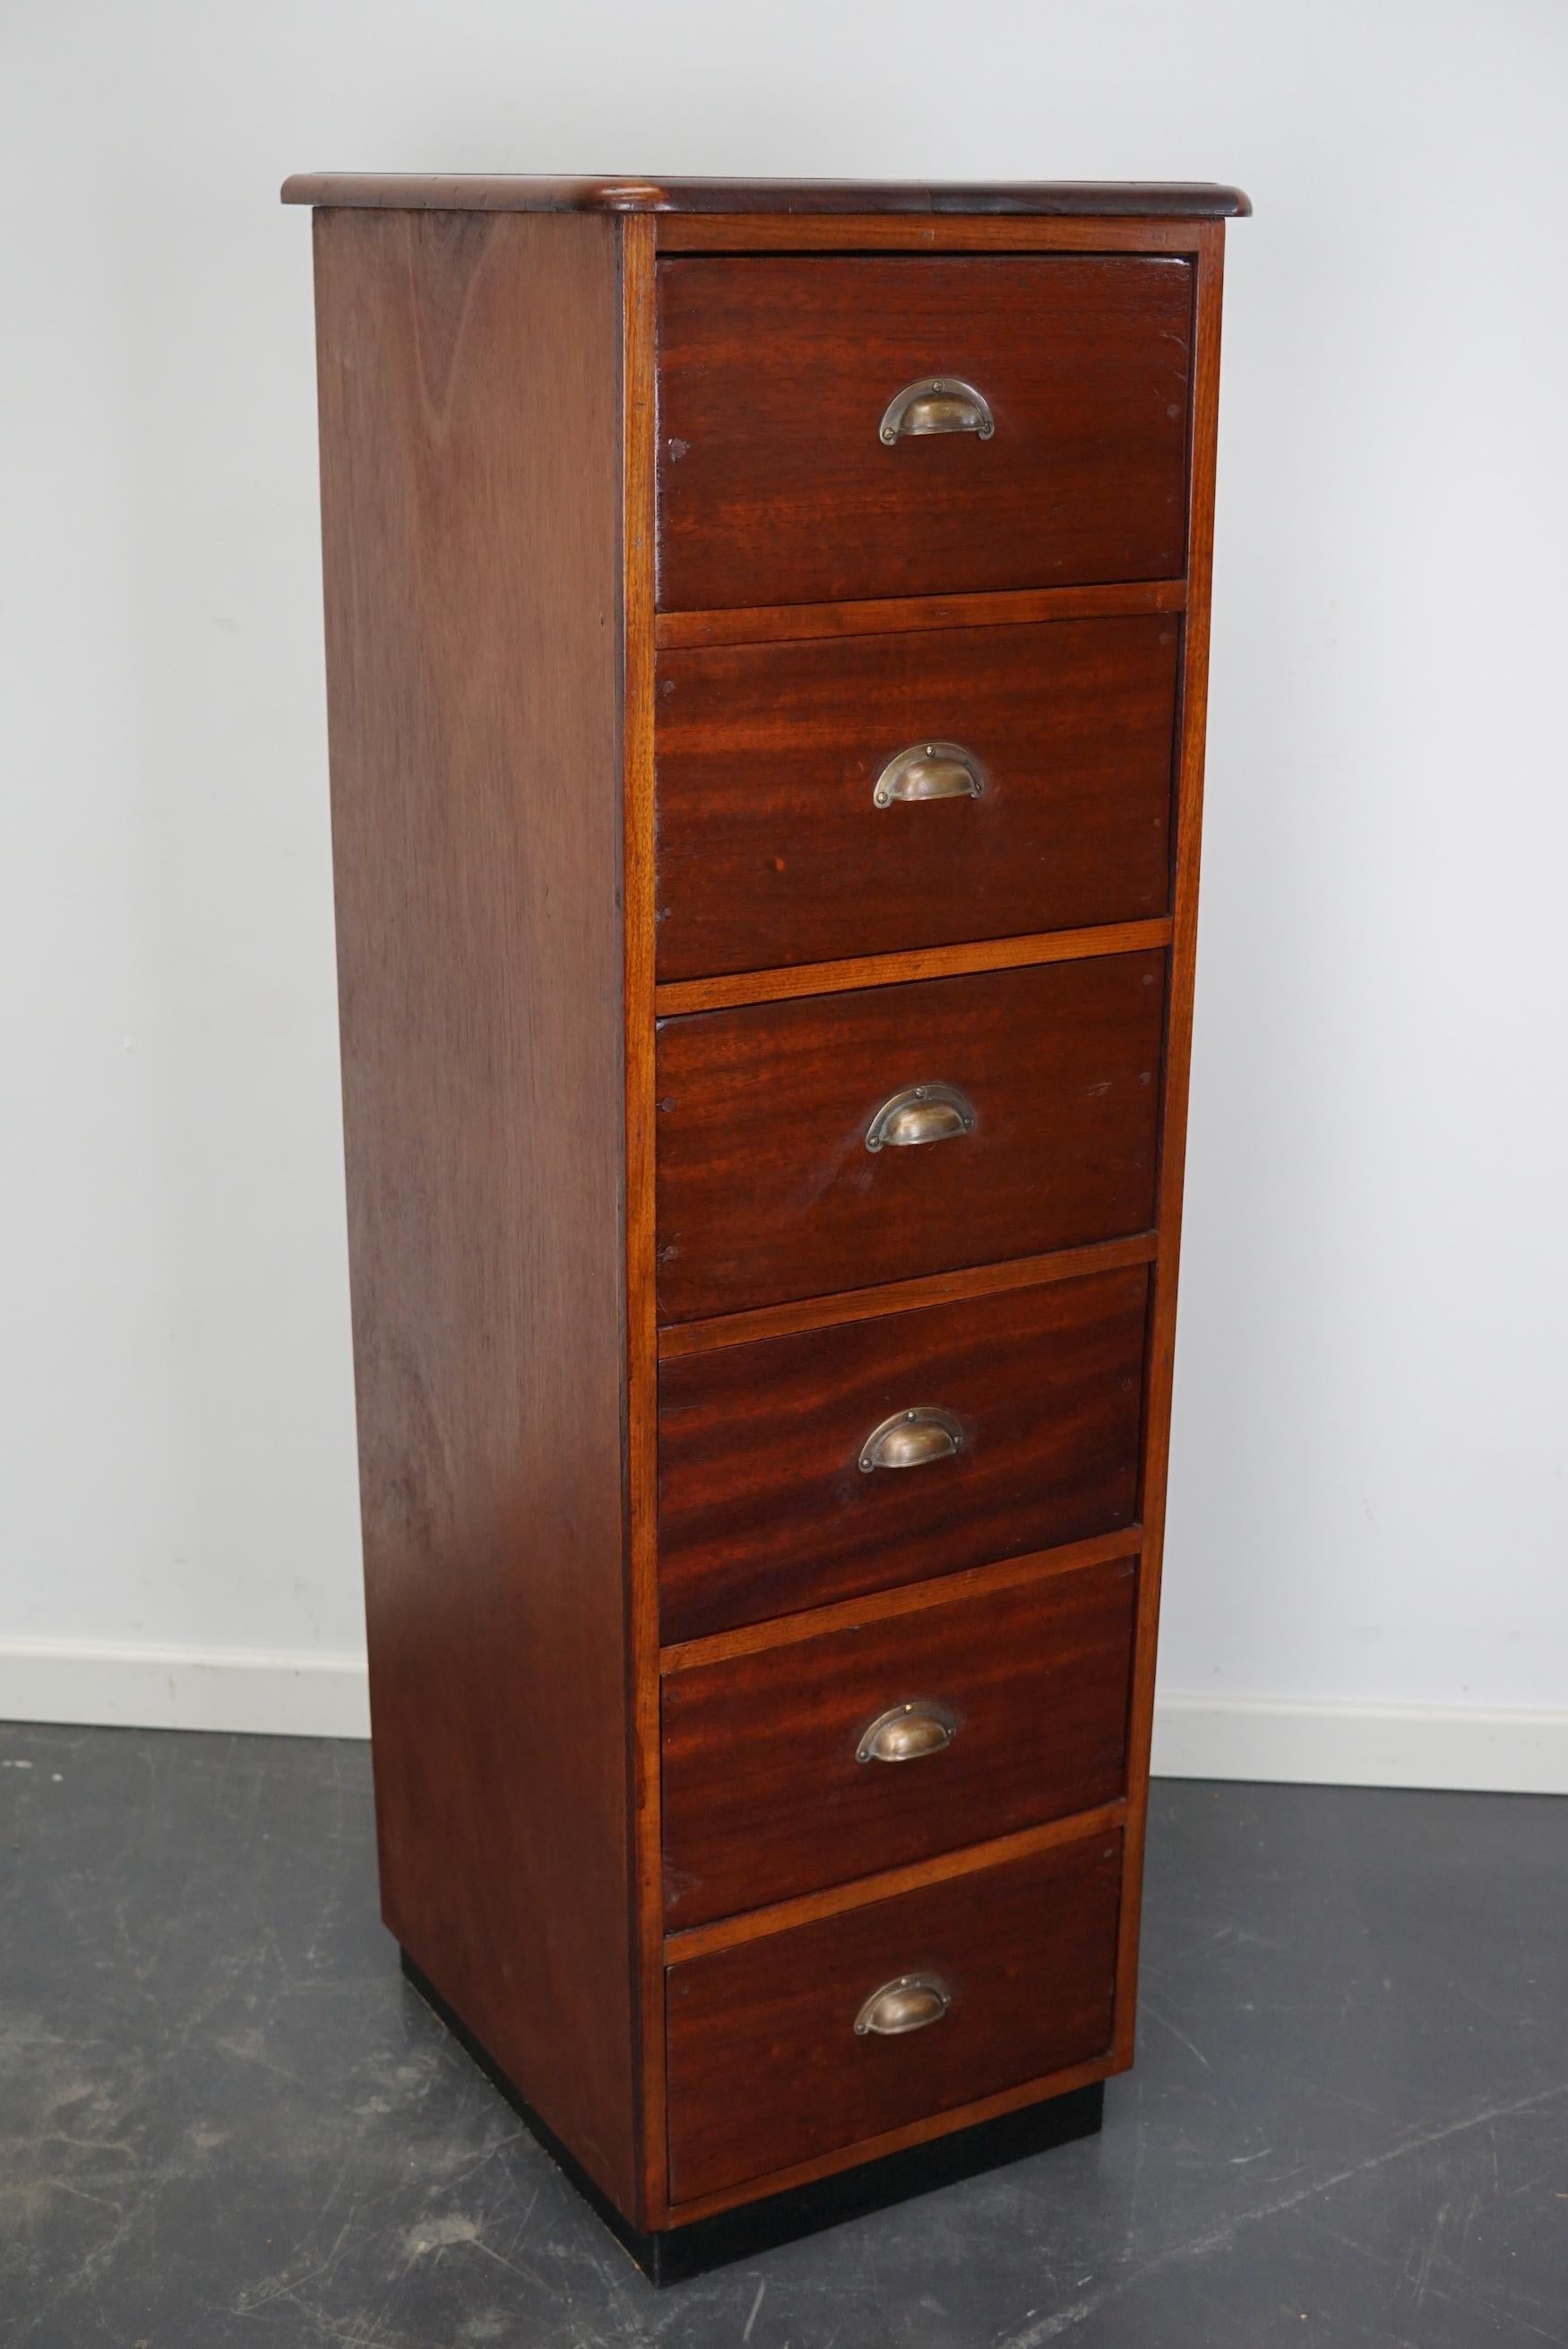 Dutch Industrial Mahogany Apothecary Cabinet, Mid-20th Century For Sale 7